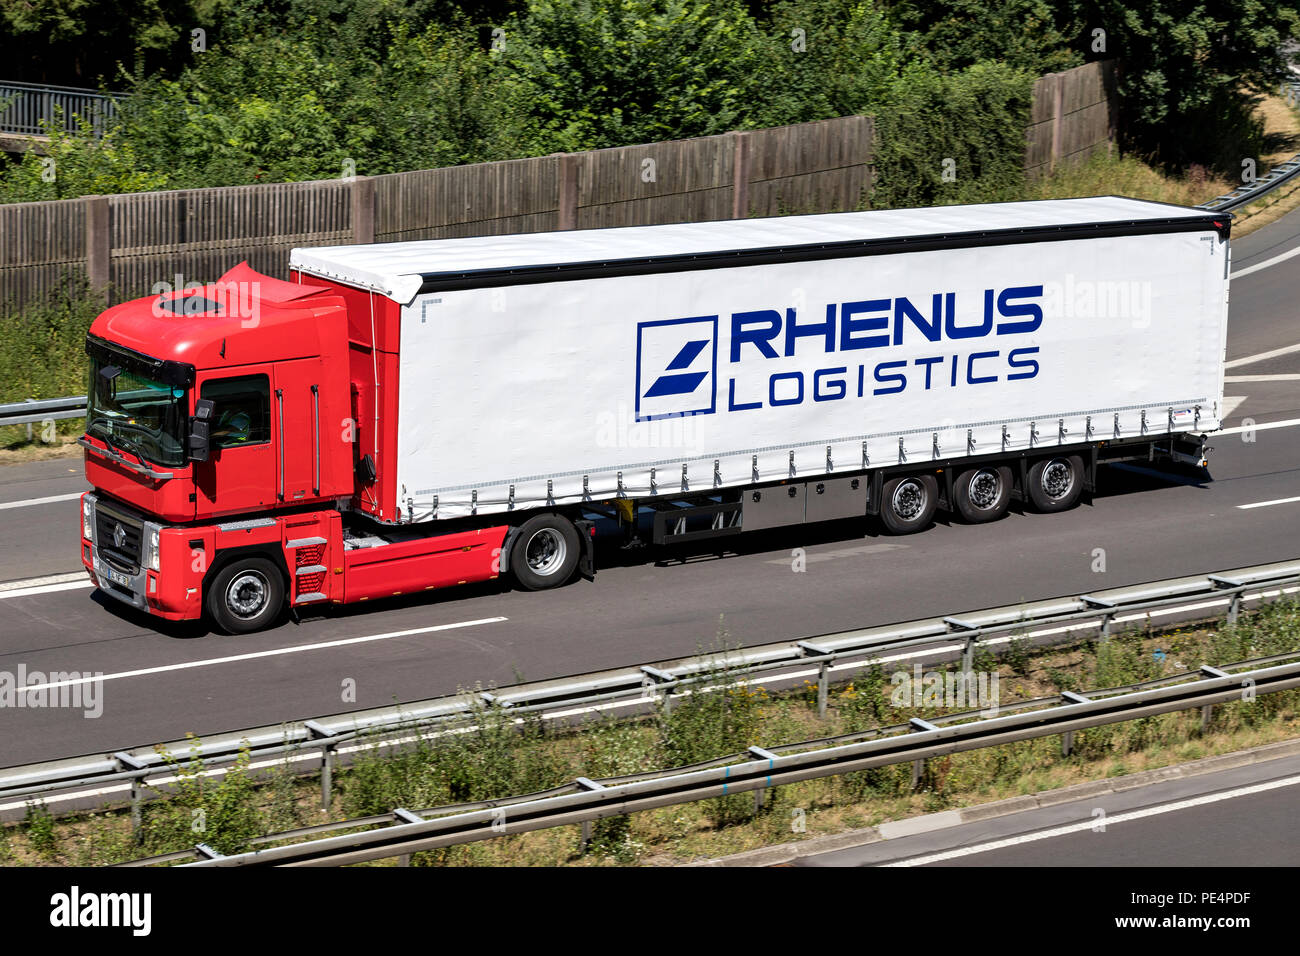 Rhenus truck on motorway. Rhenus Group is a global logistics service company with more than 610 locations worldwide and 29,000 employers. Stock Photo